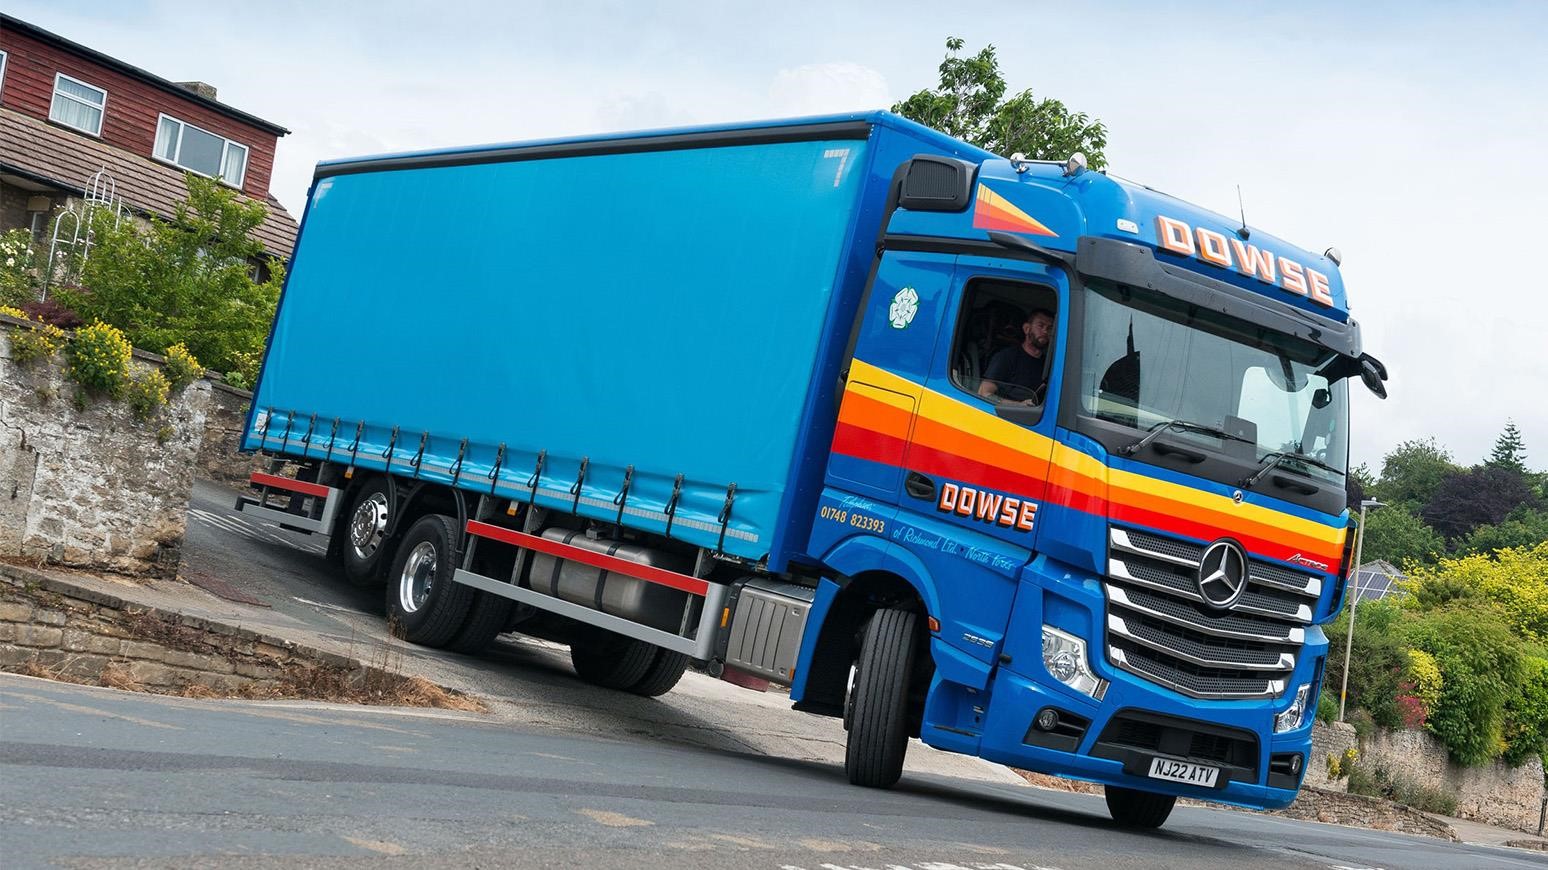 Dowse Of Richmond Replaces 10-Year-Old, 1-Million-Mile Mercedes-Benz Truck With New 26-Tonne Actros